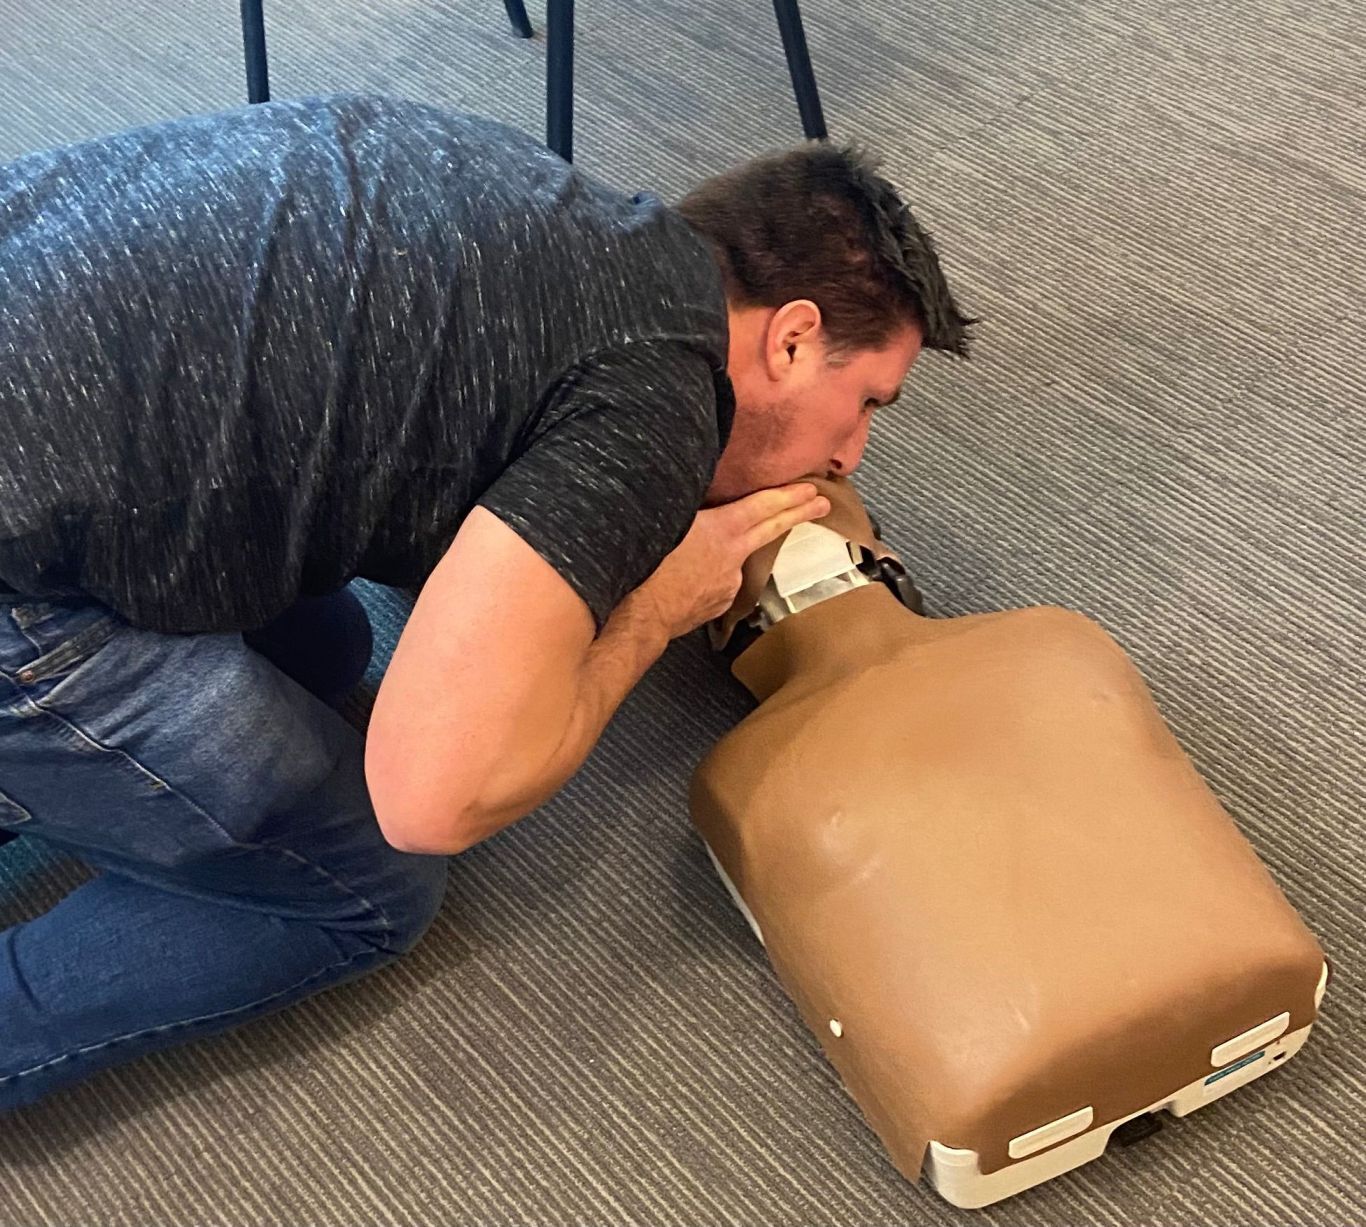 Glasgow First Aid Courses Part of Skills Training Group, it has made a name for itself on its wide range of top-notch public first aid courses and on-site first aid courses